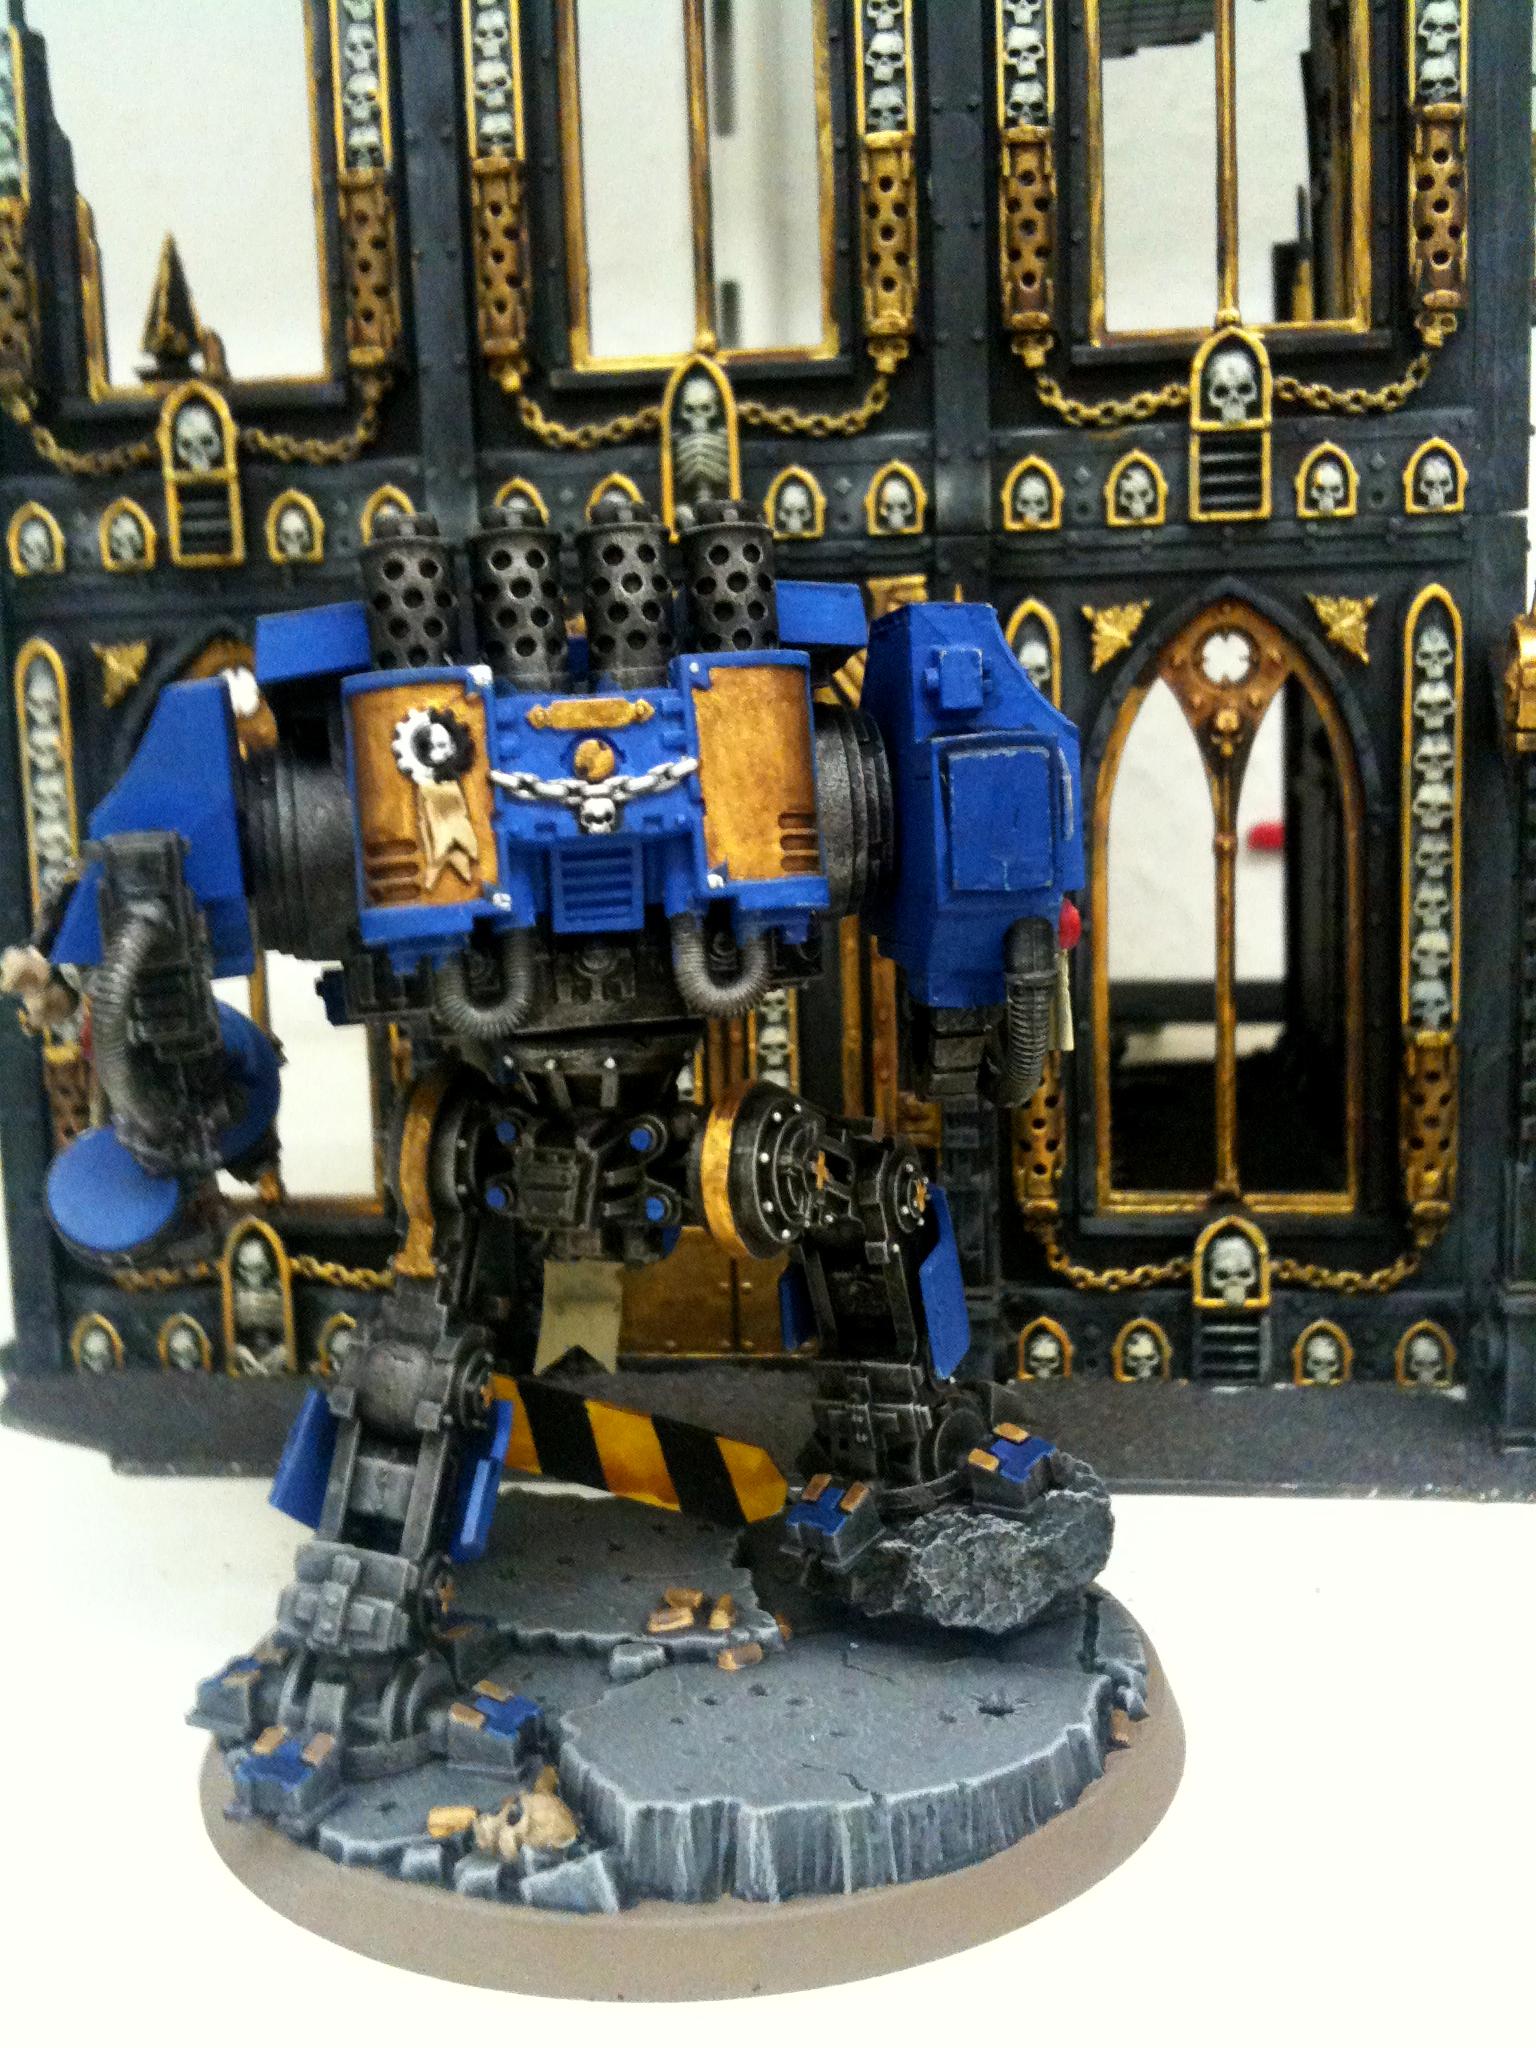 Cities Of Death, Conversion, Cybot, Dreadnought, Heroic, Space Marines, Ultramarines